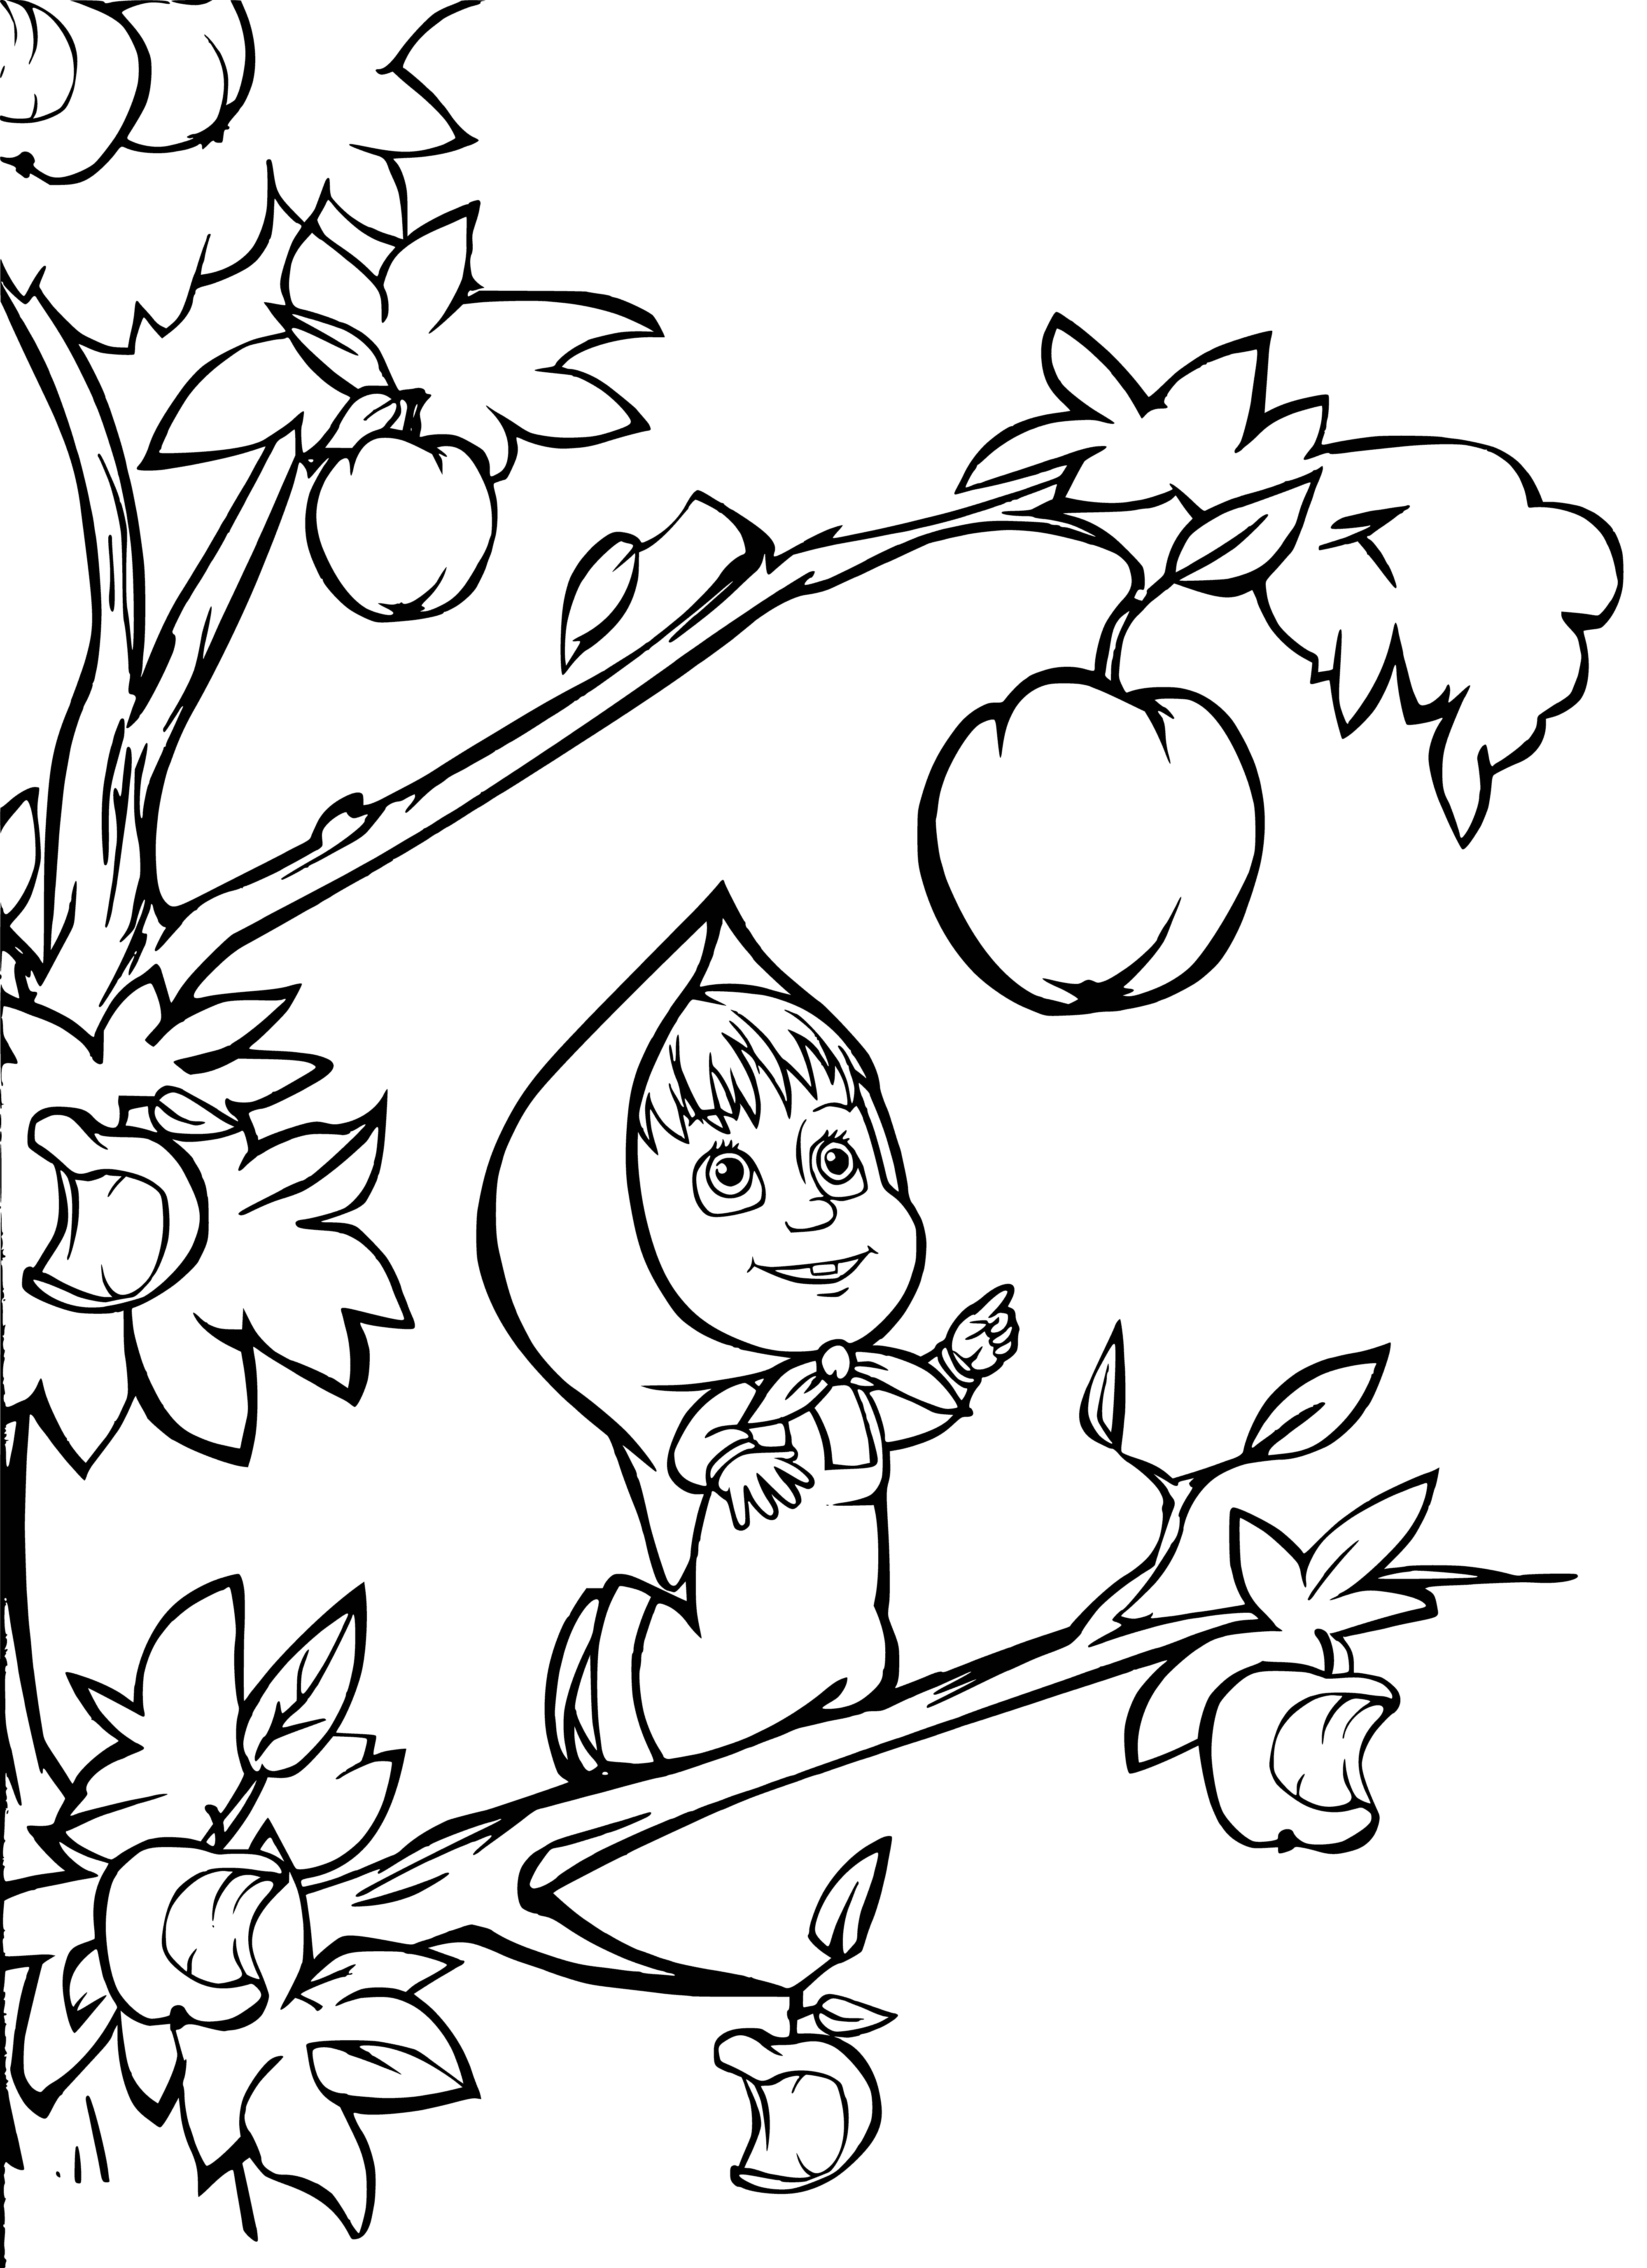 coloring page: A giant red apple stands out among green-leafed ones in a coloring page devoid of people or animals.